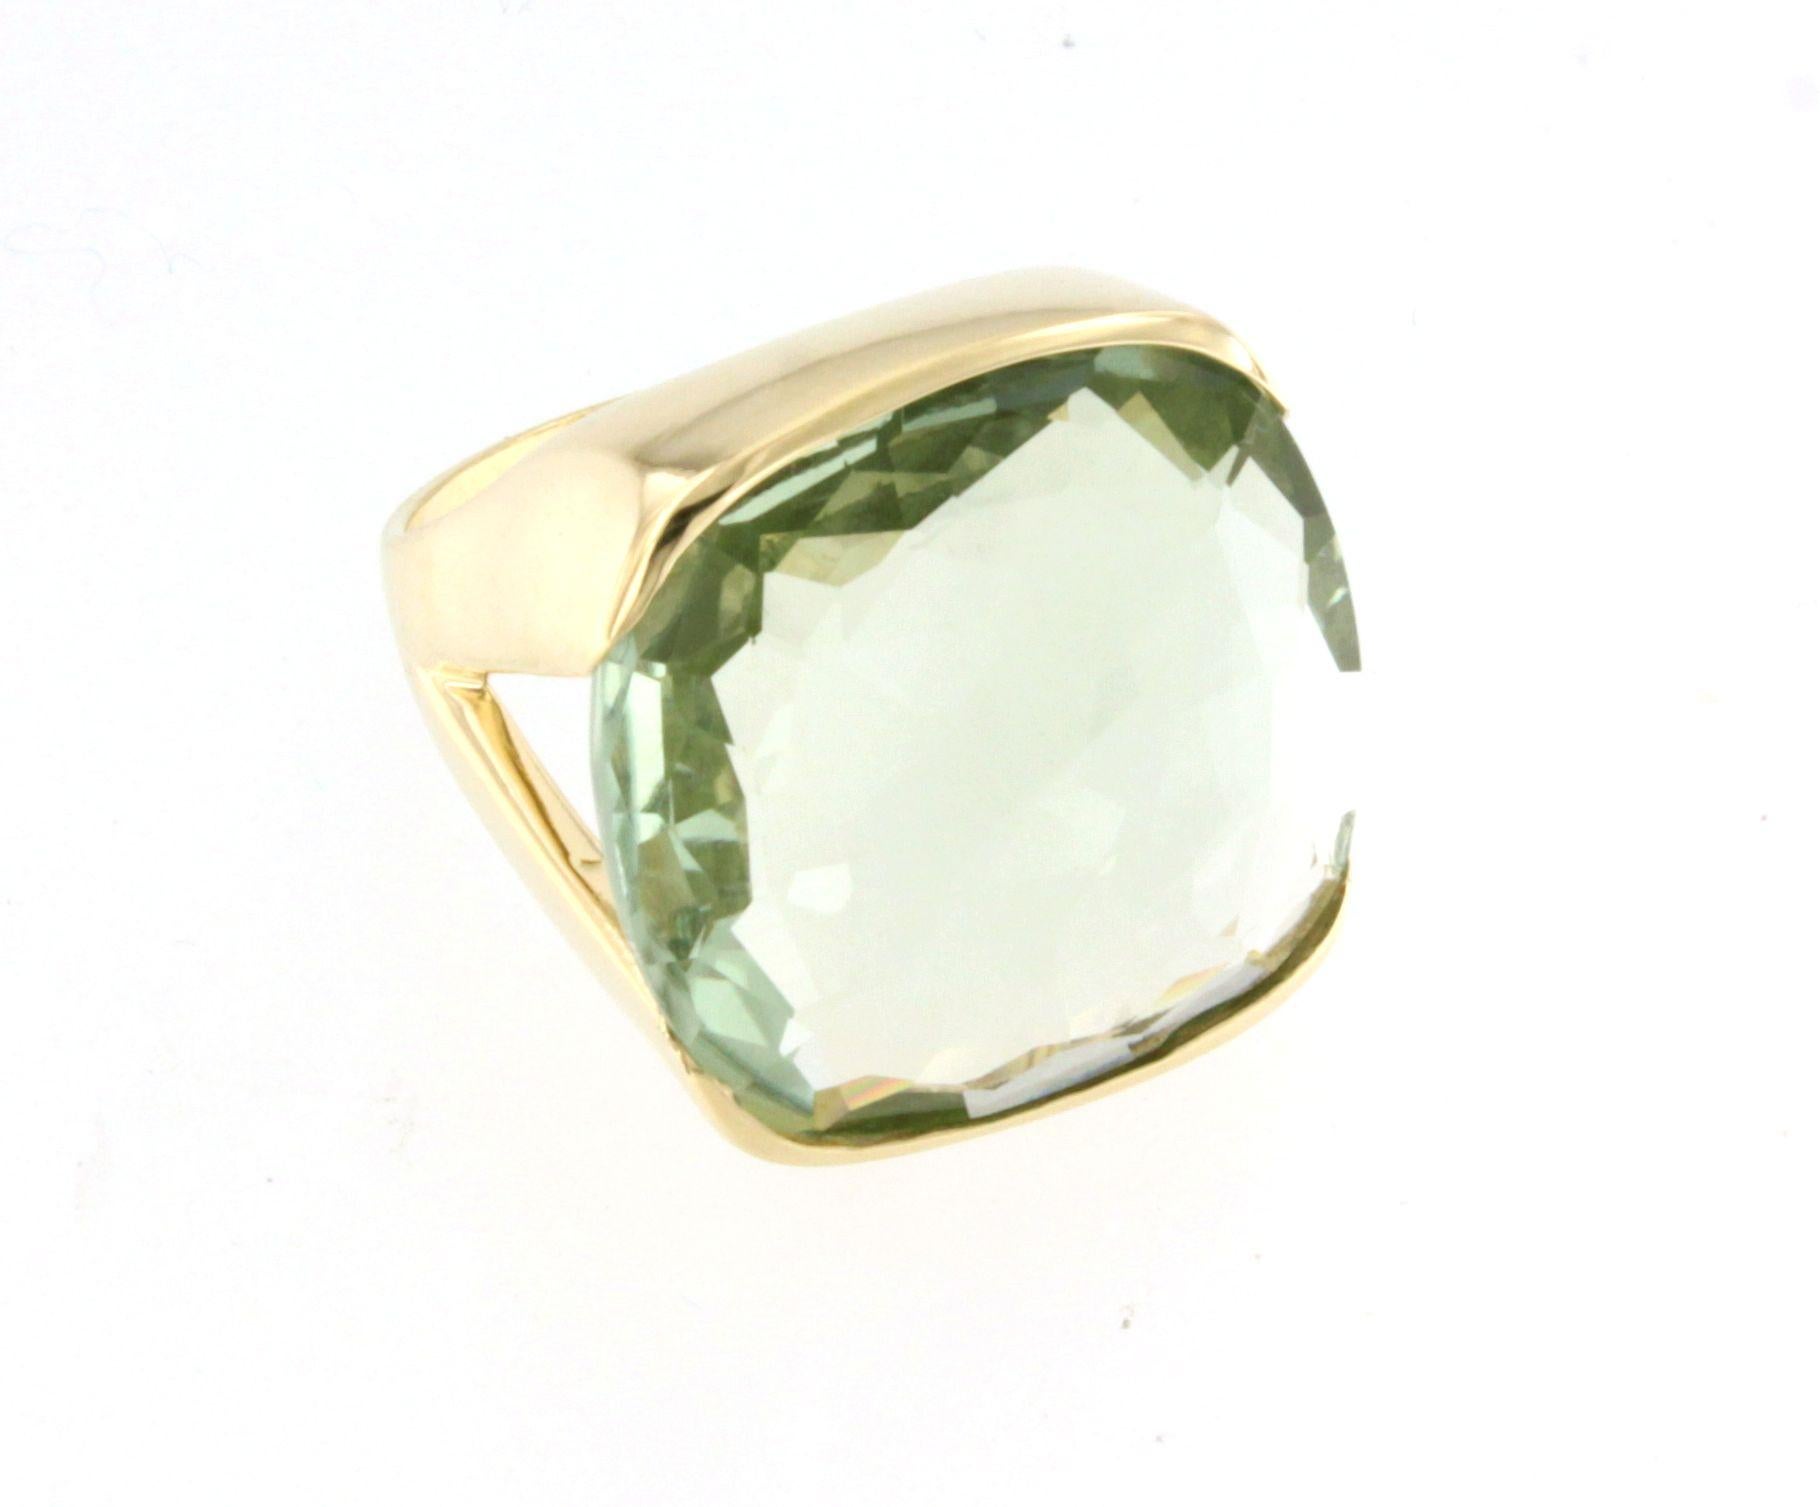  Combination of shapes and colors made a unique fashion and modern ring in 18k yellow gold with colored stones. Made in Italy by Stanoppi Jewellery since 1948.
Stone : Prasiolite or Green Amethyst 
( Square cut, size: 20x20 mm )   g.14.80
Size :  EU